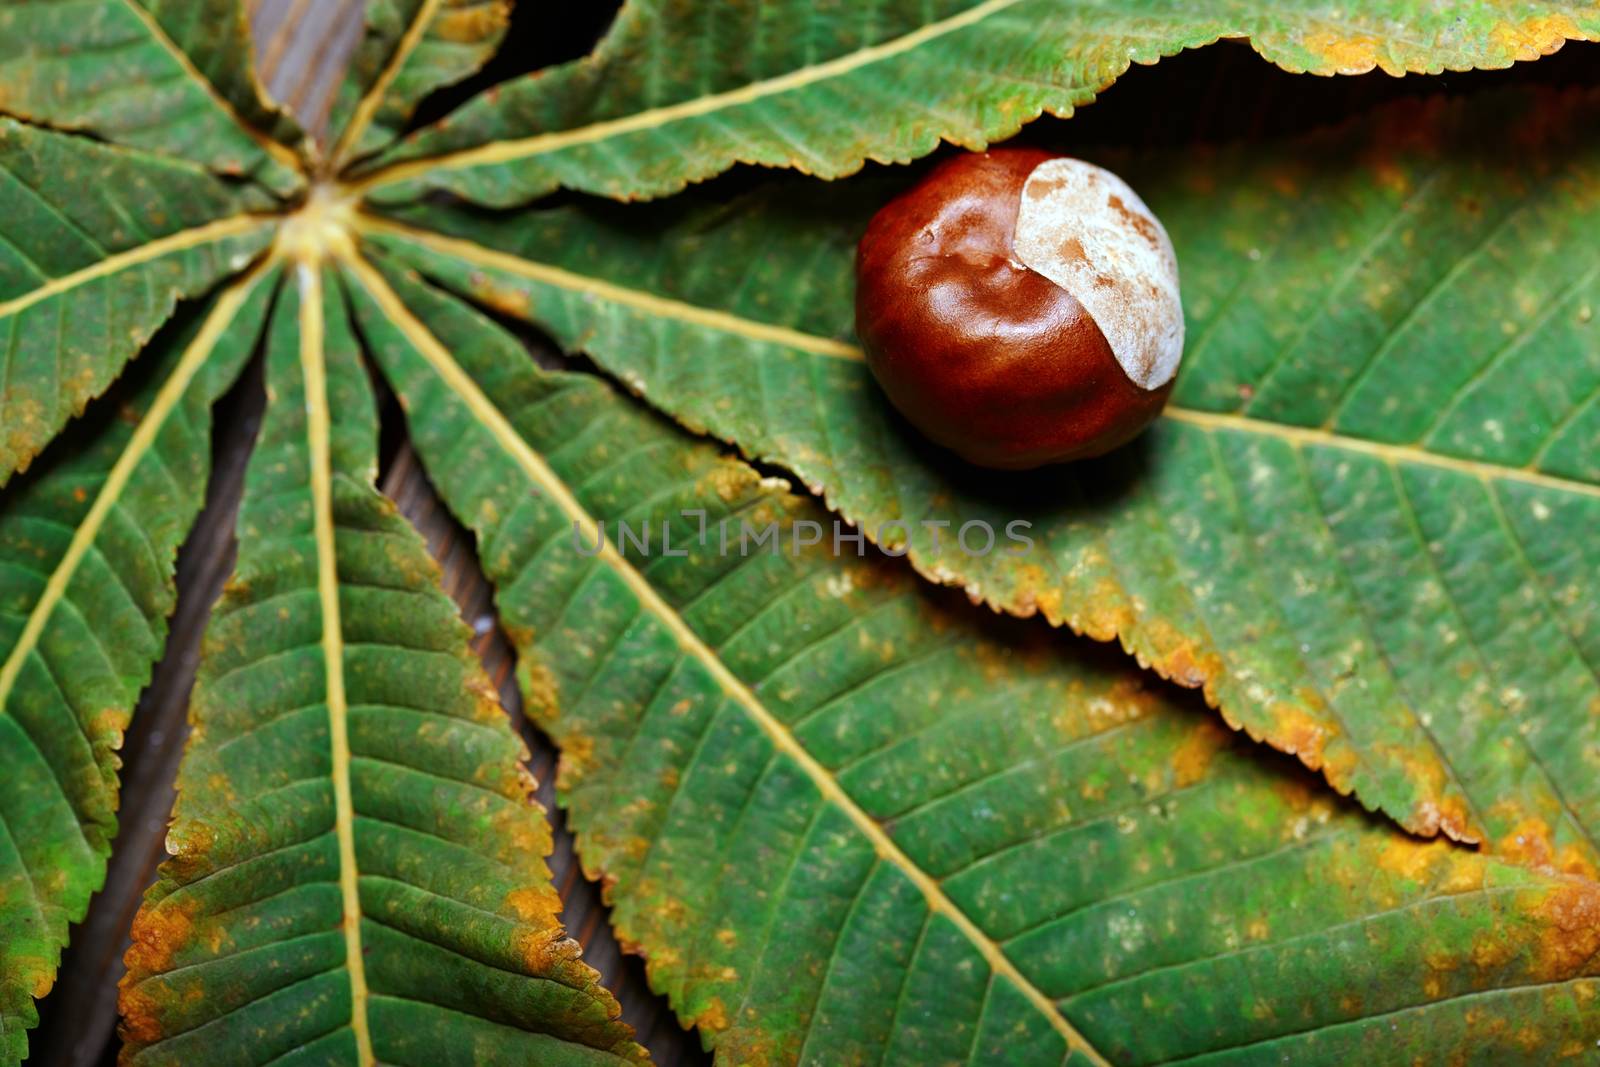 Chestnuts on the leaf. Close-up